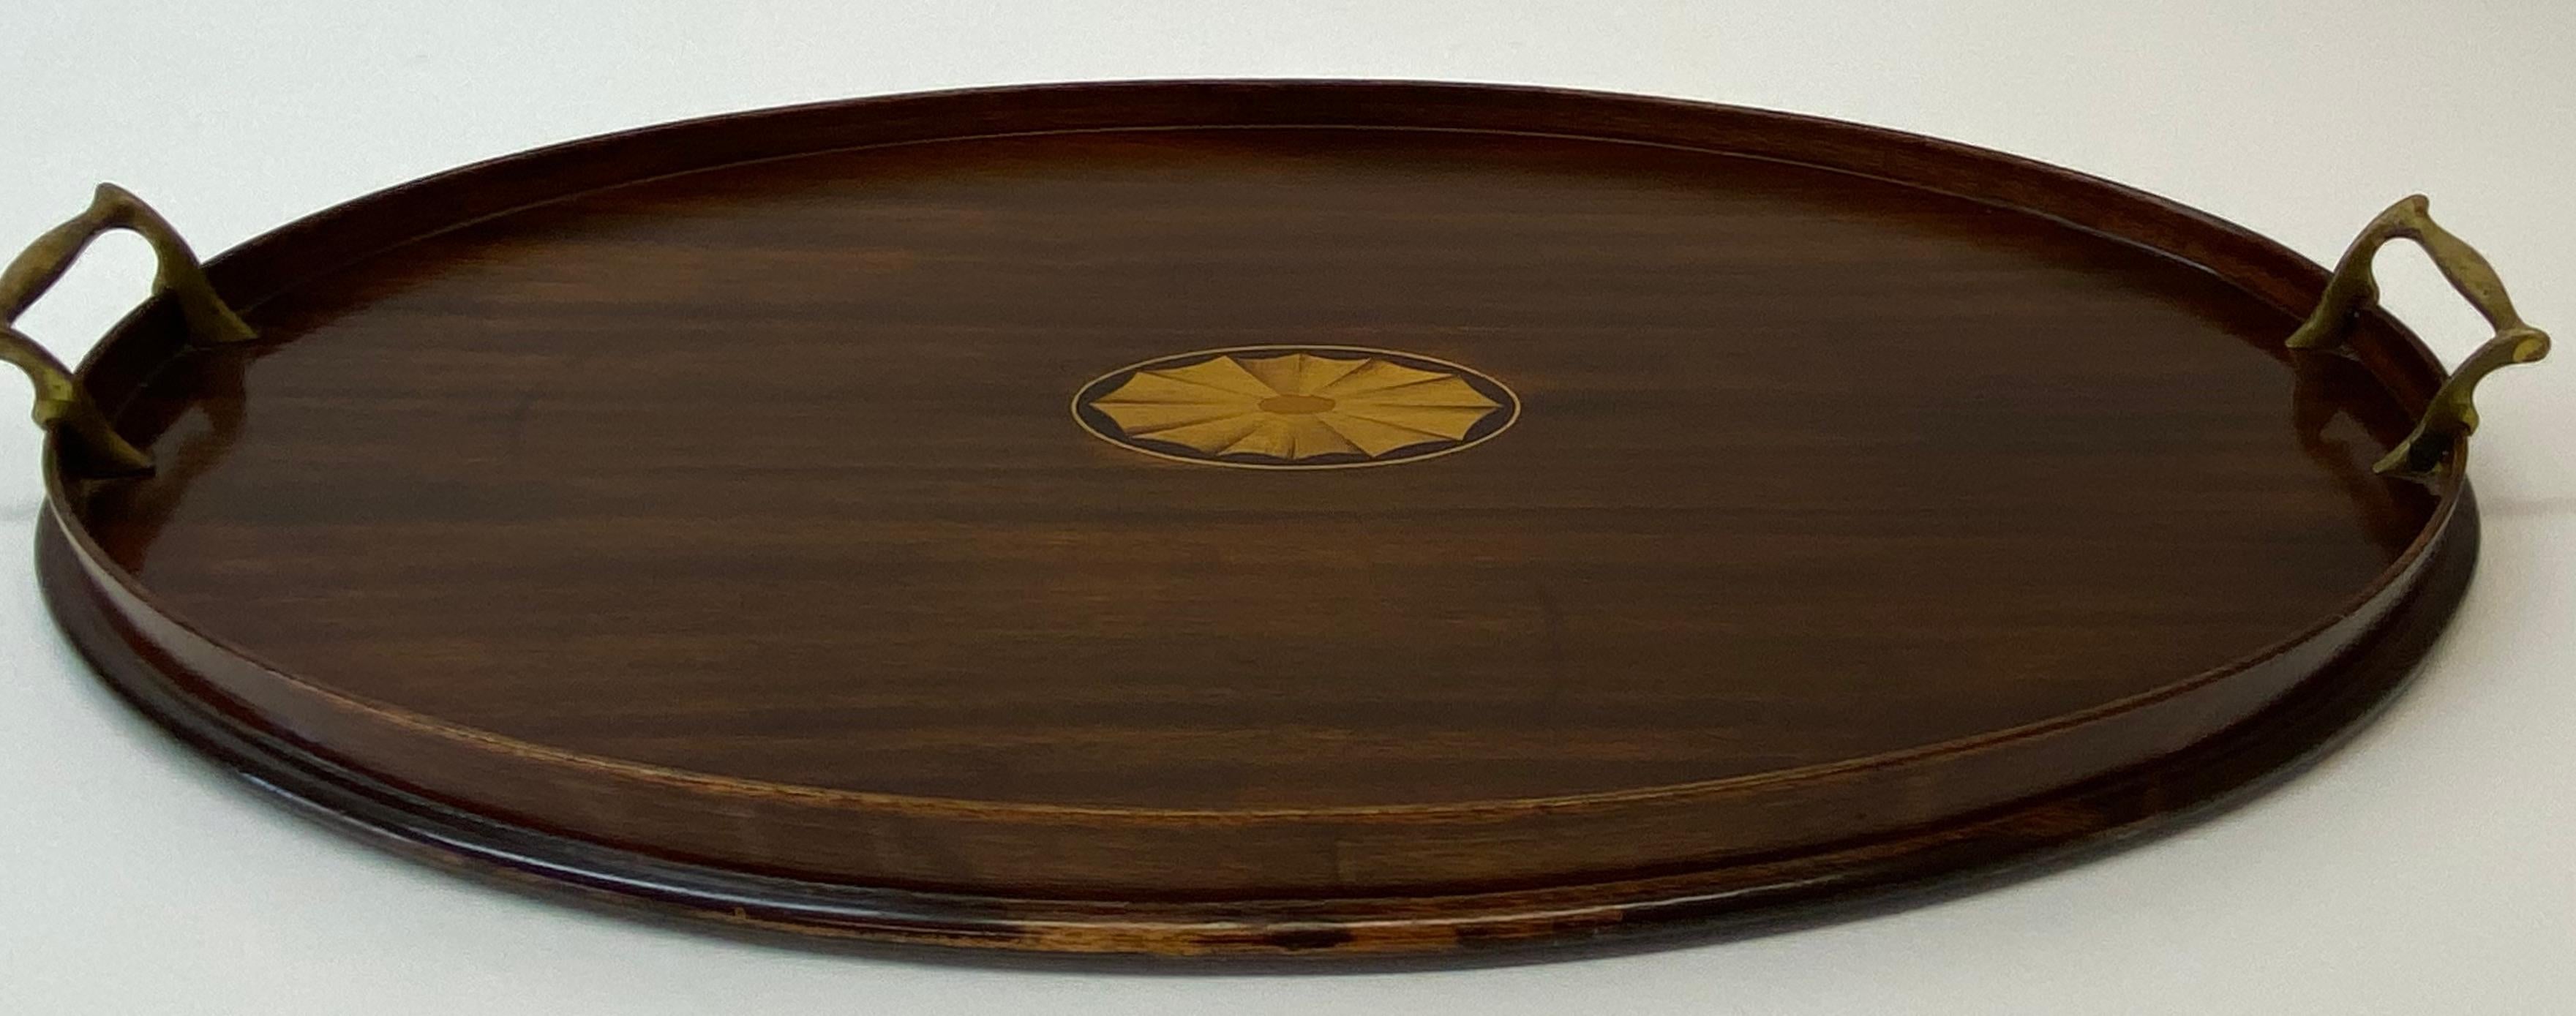 Early 20th century mahogany serving tray w/ walnut inlay c.1910

A fine antique serving / bar tray for your favorite bottles and glasses

Measures: 24